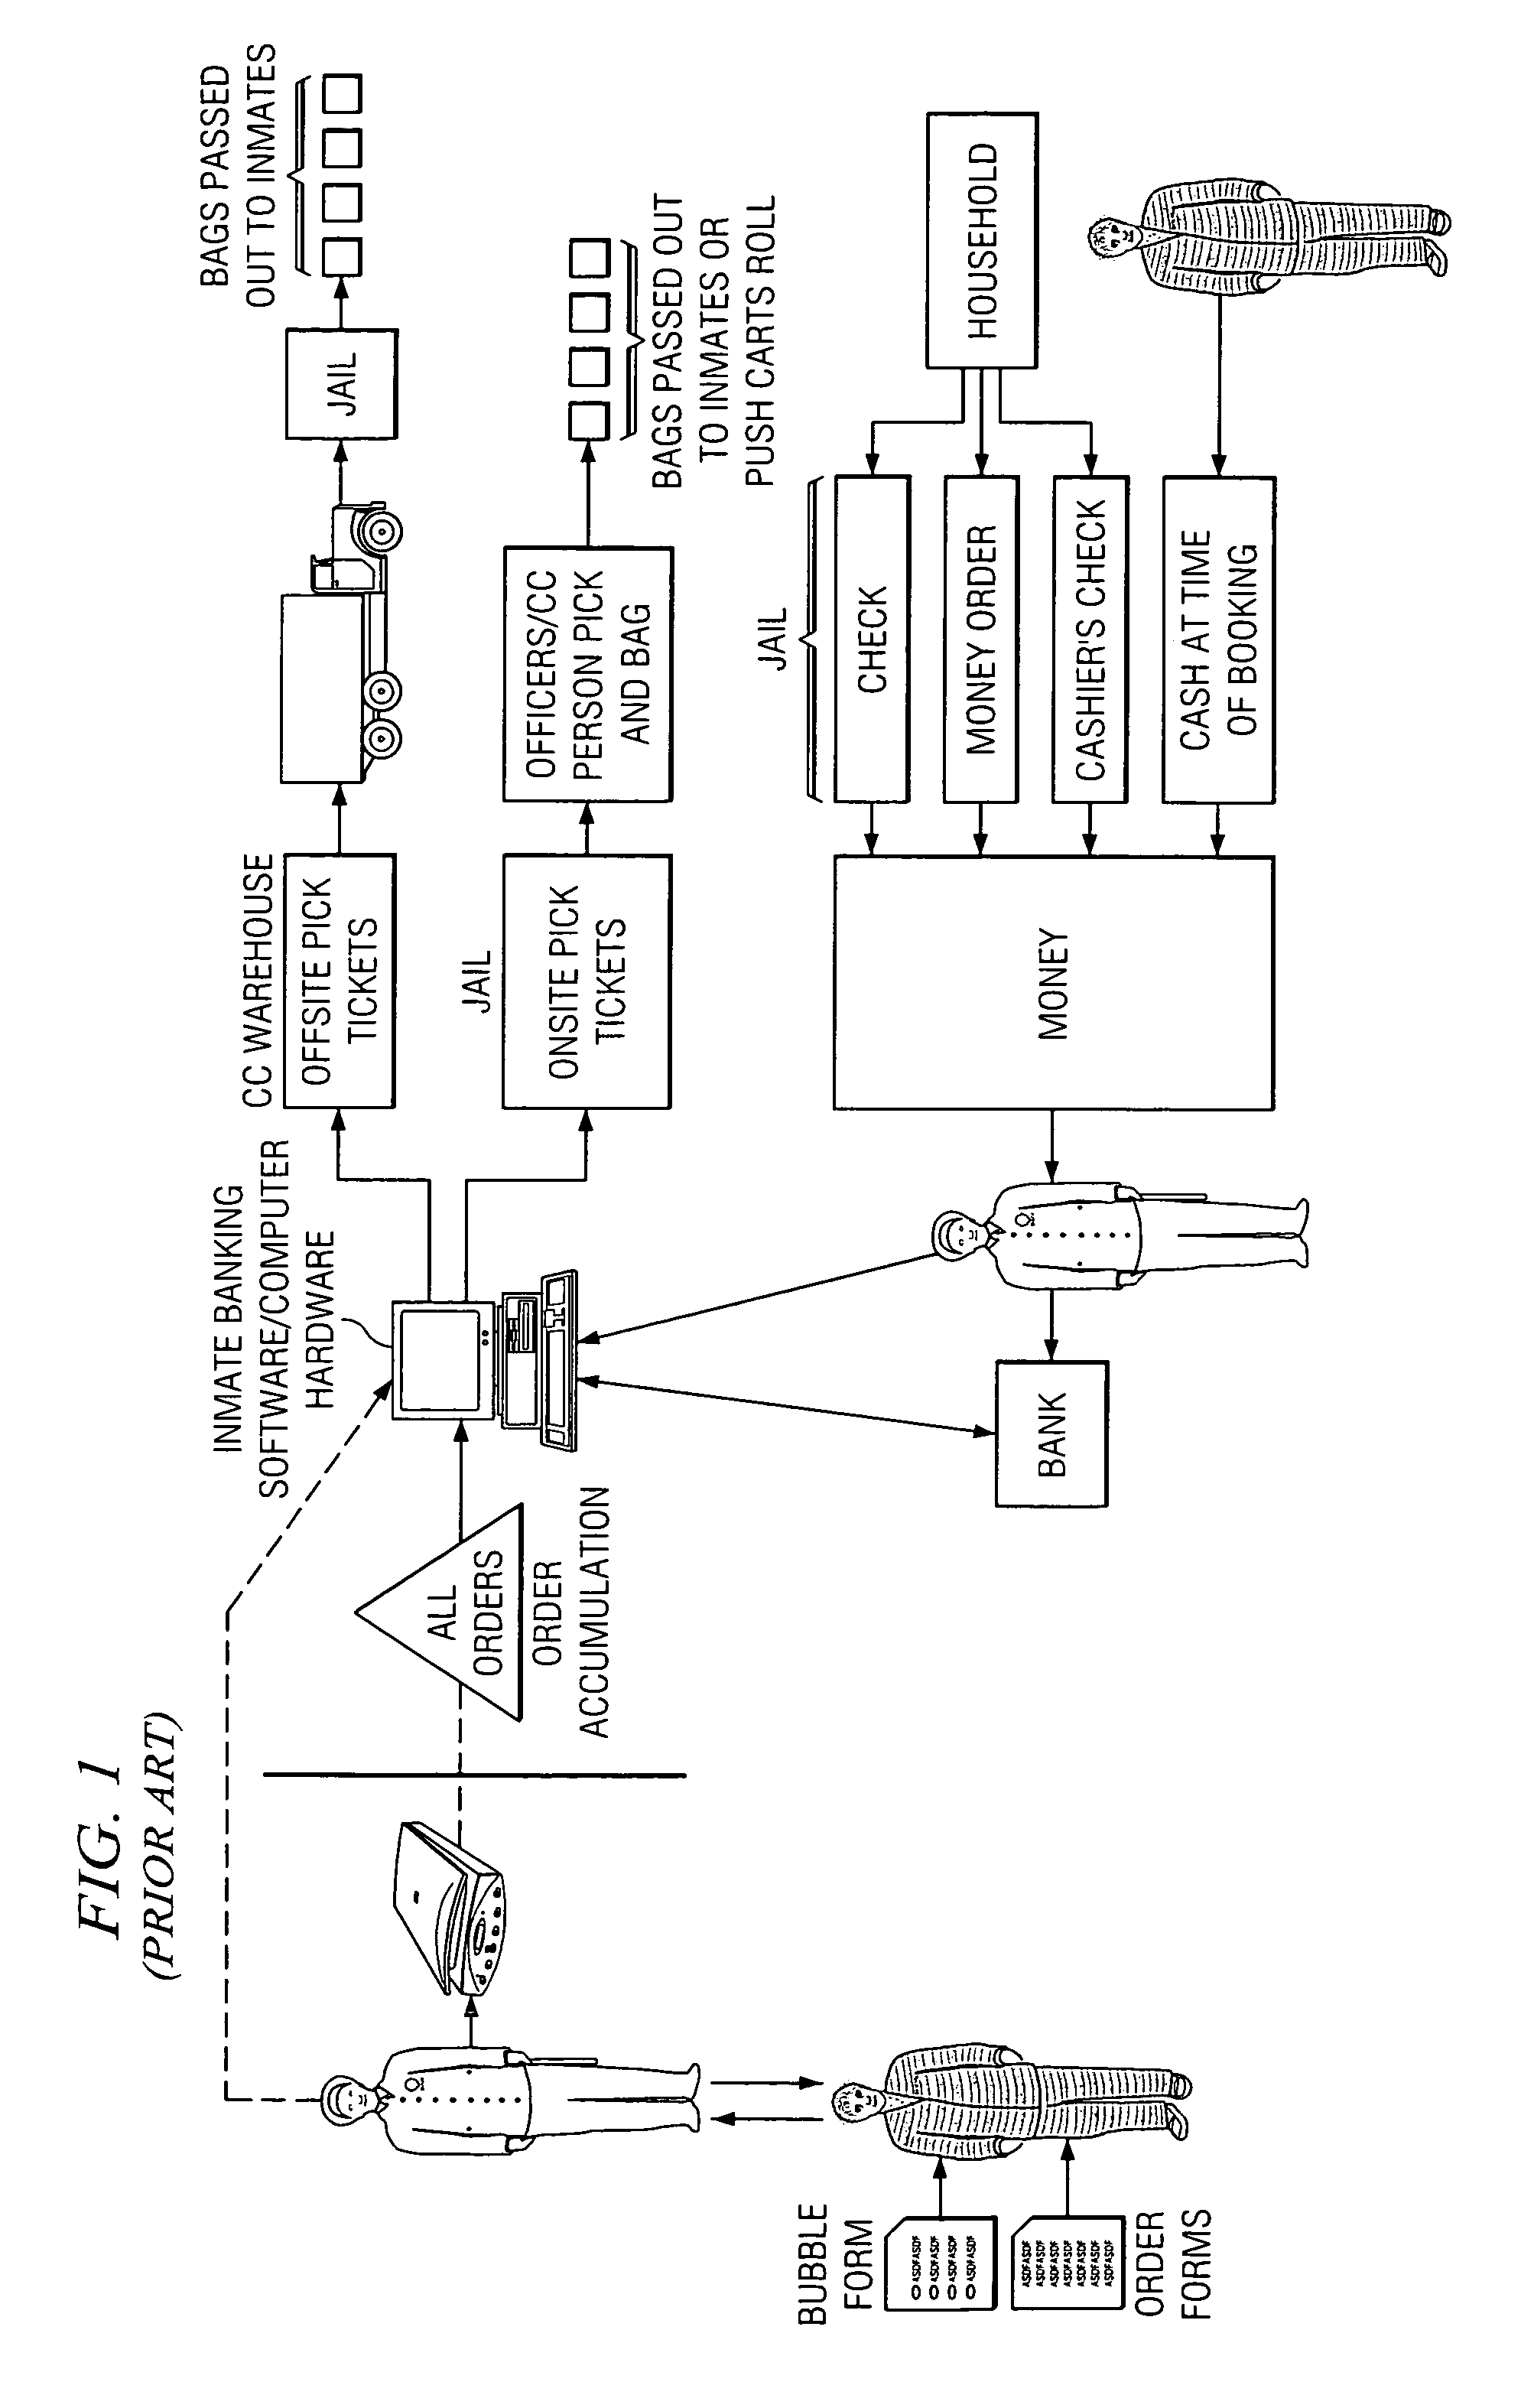 Systems and methods for transaction and information management